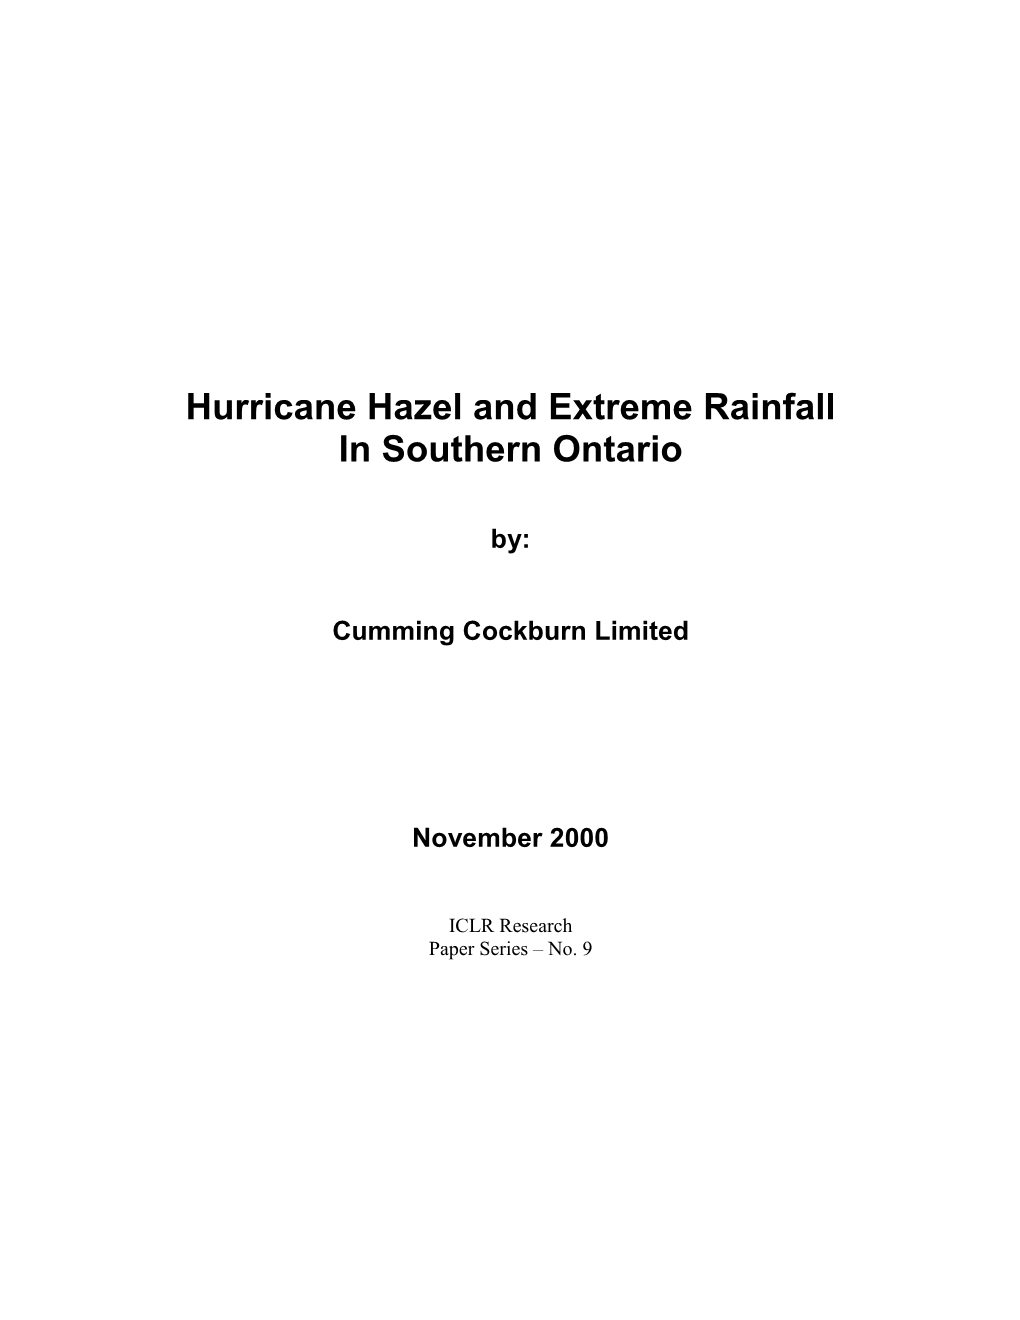 Hurricane Hazel and Extreme Rainfall in Southern Ontario